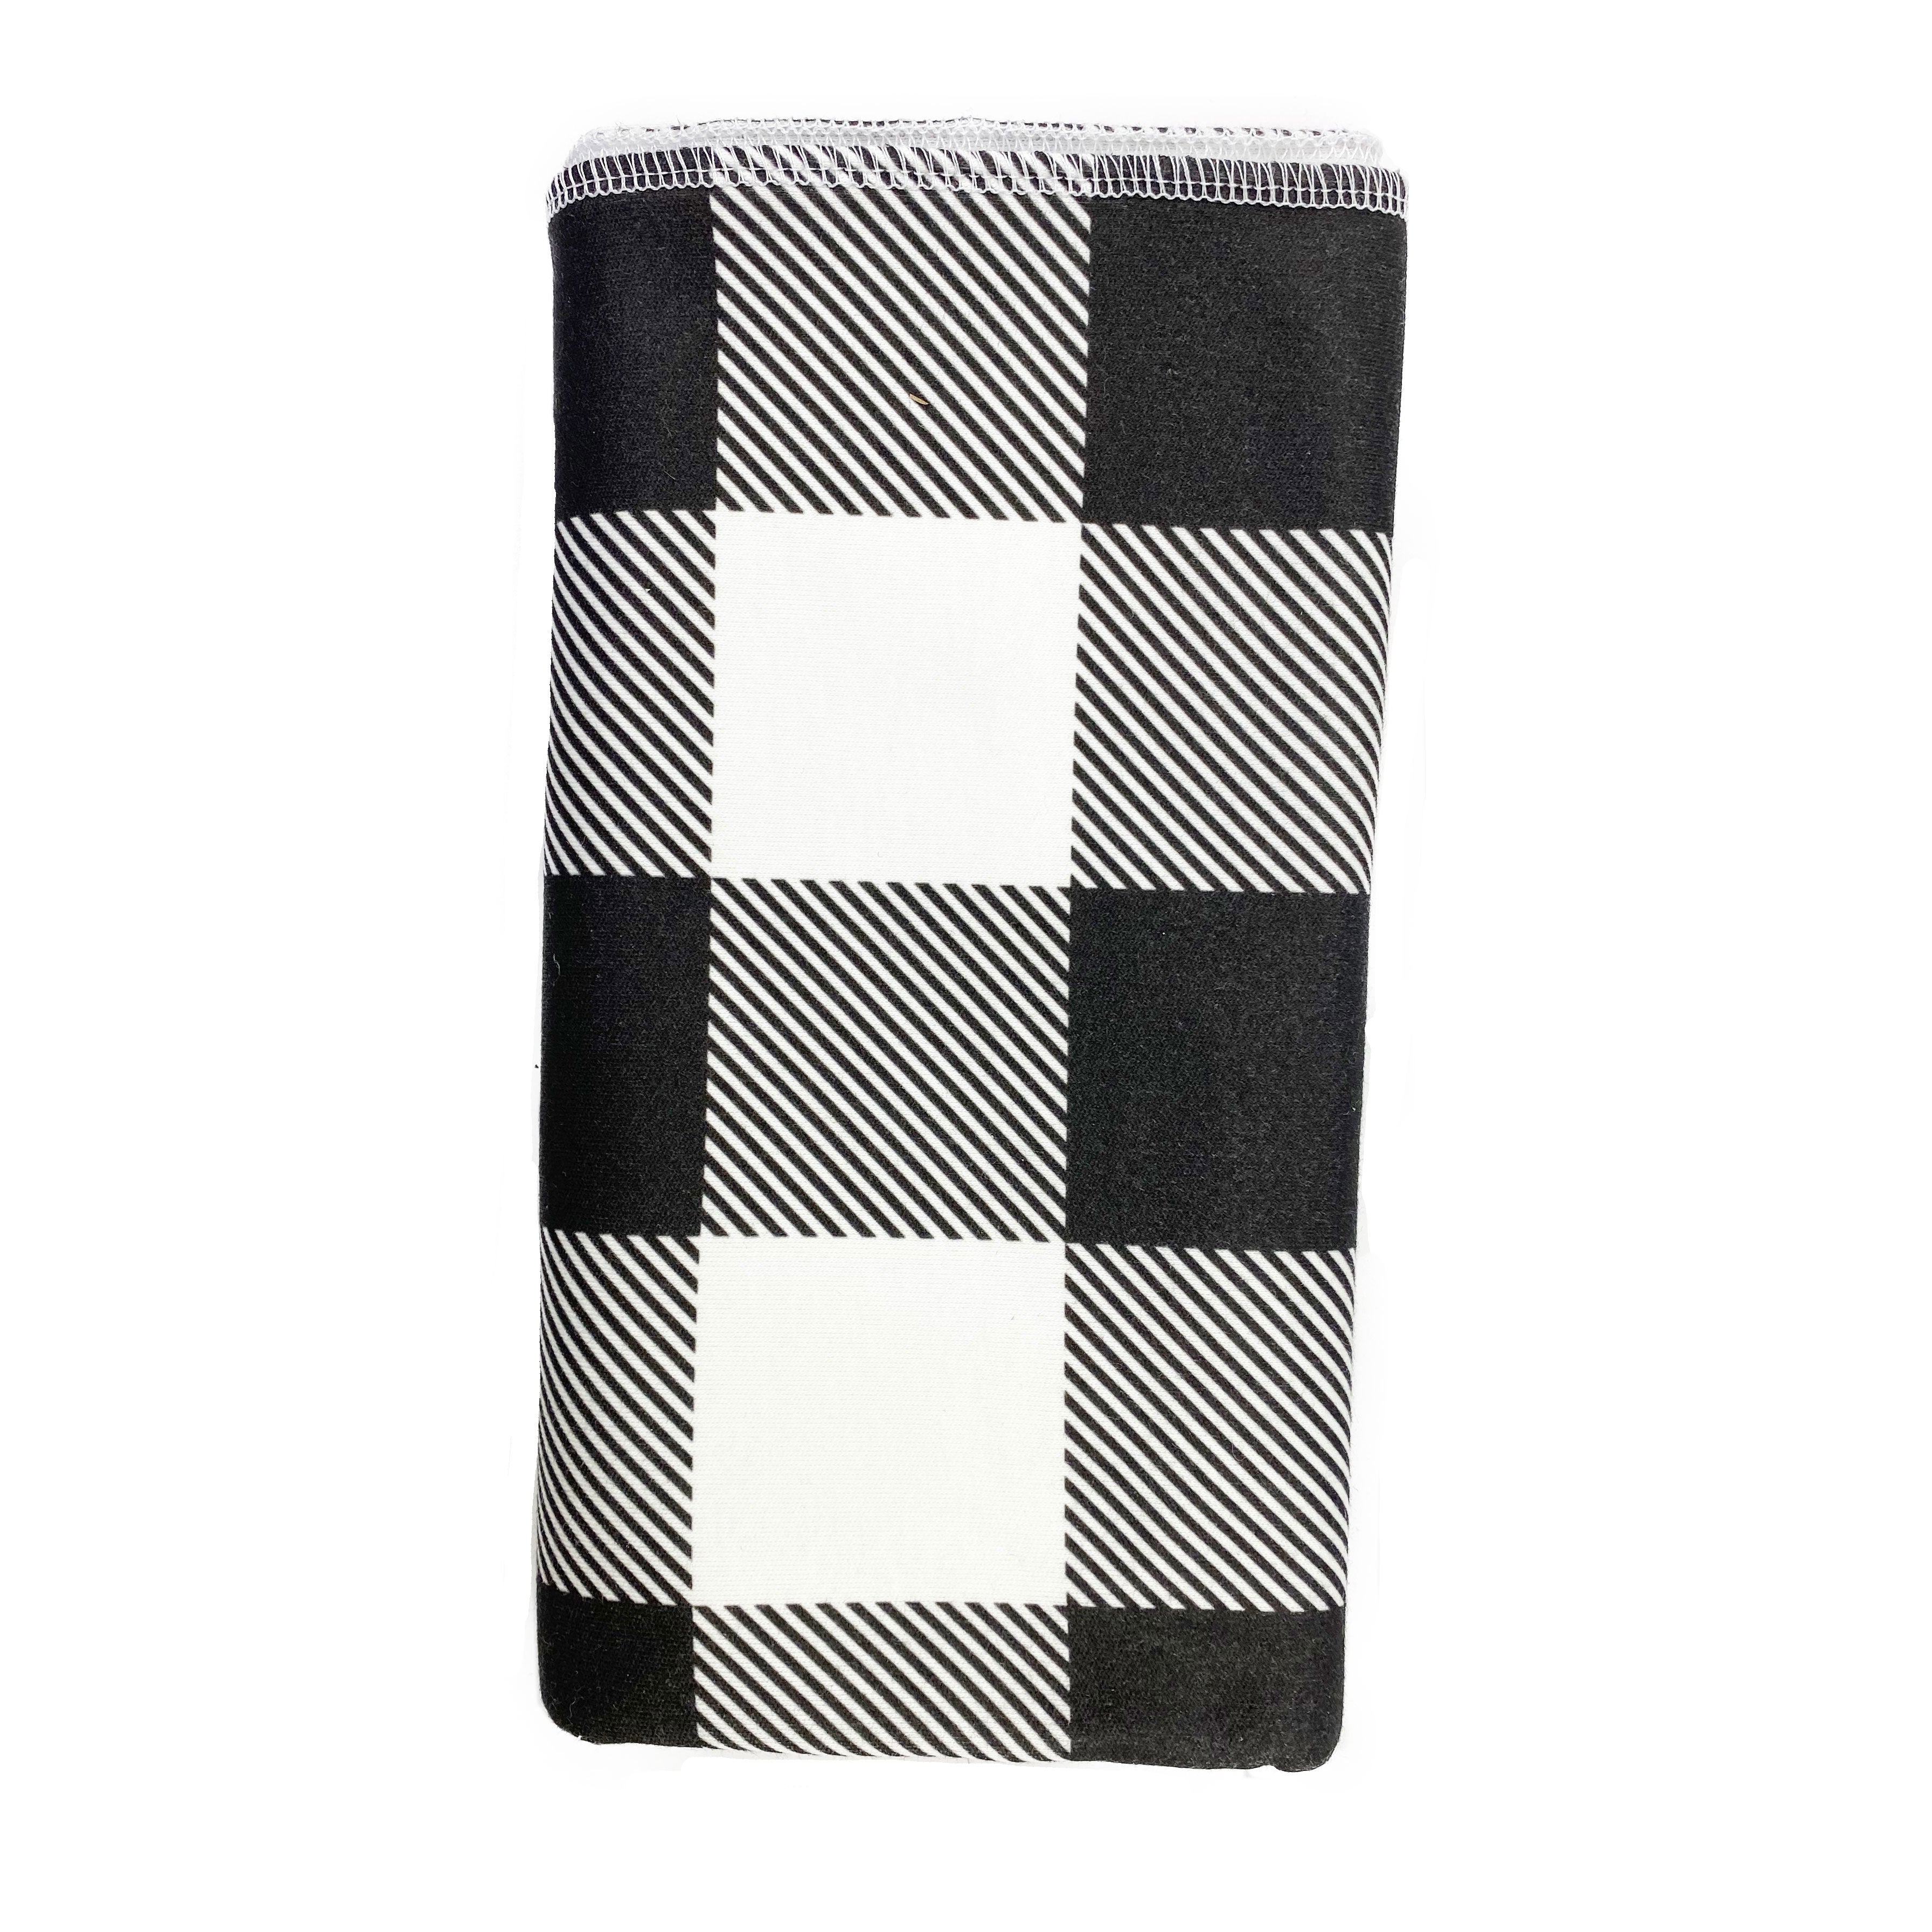 Modern monochrome plaid baby swaddle blanket at Bonjour Baby Baskets